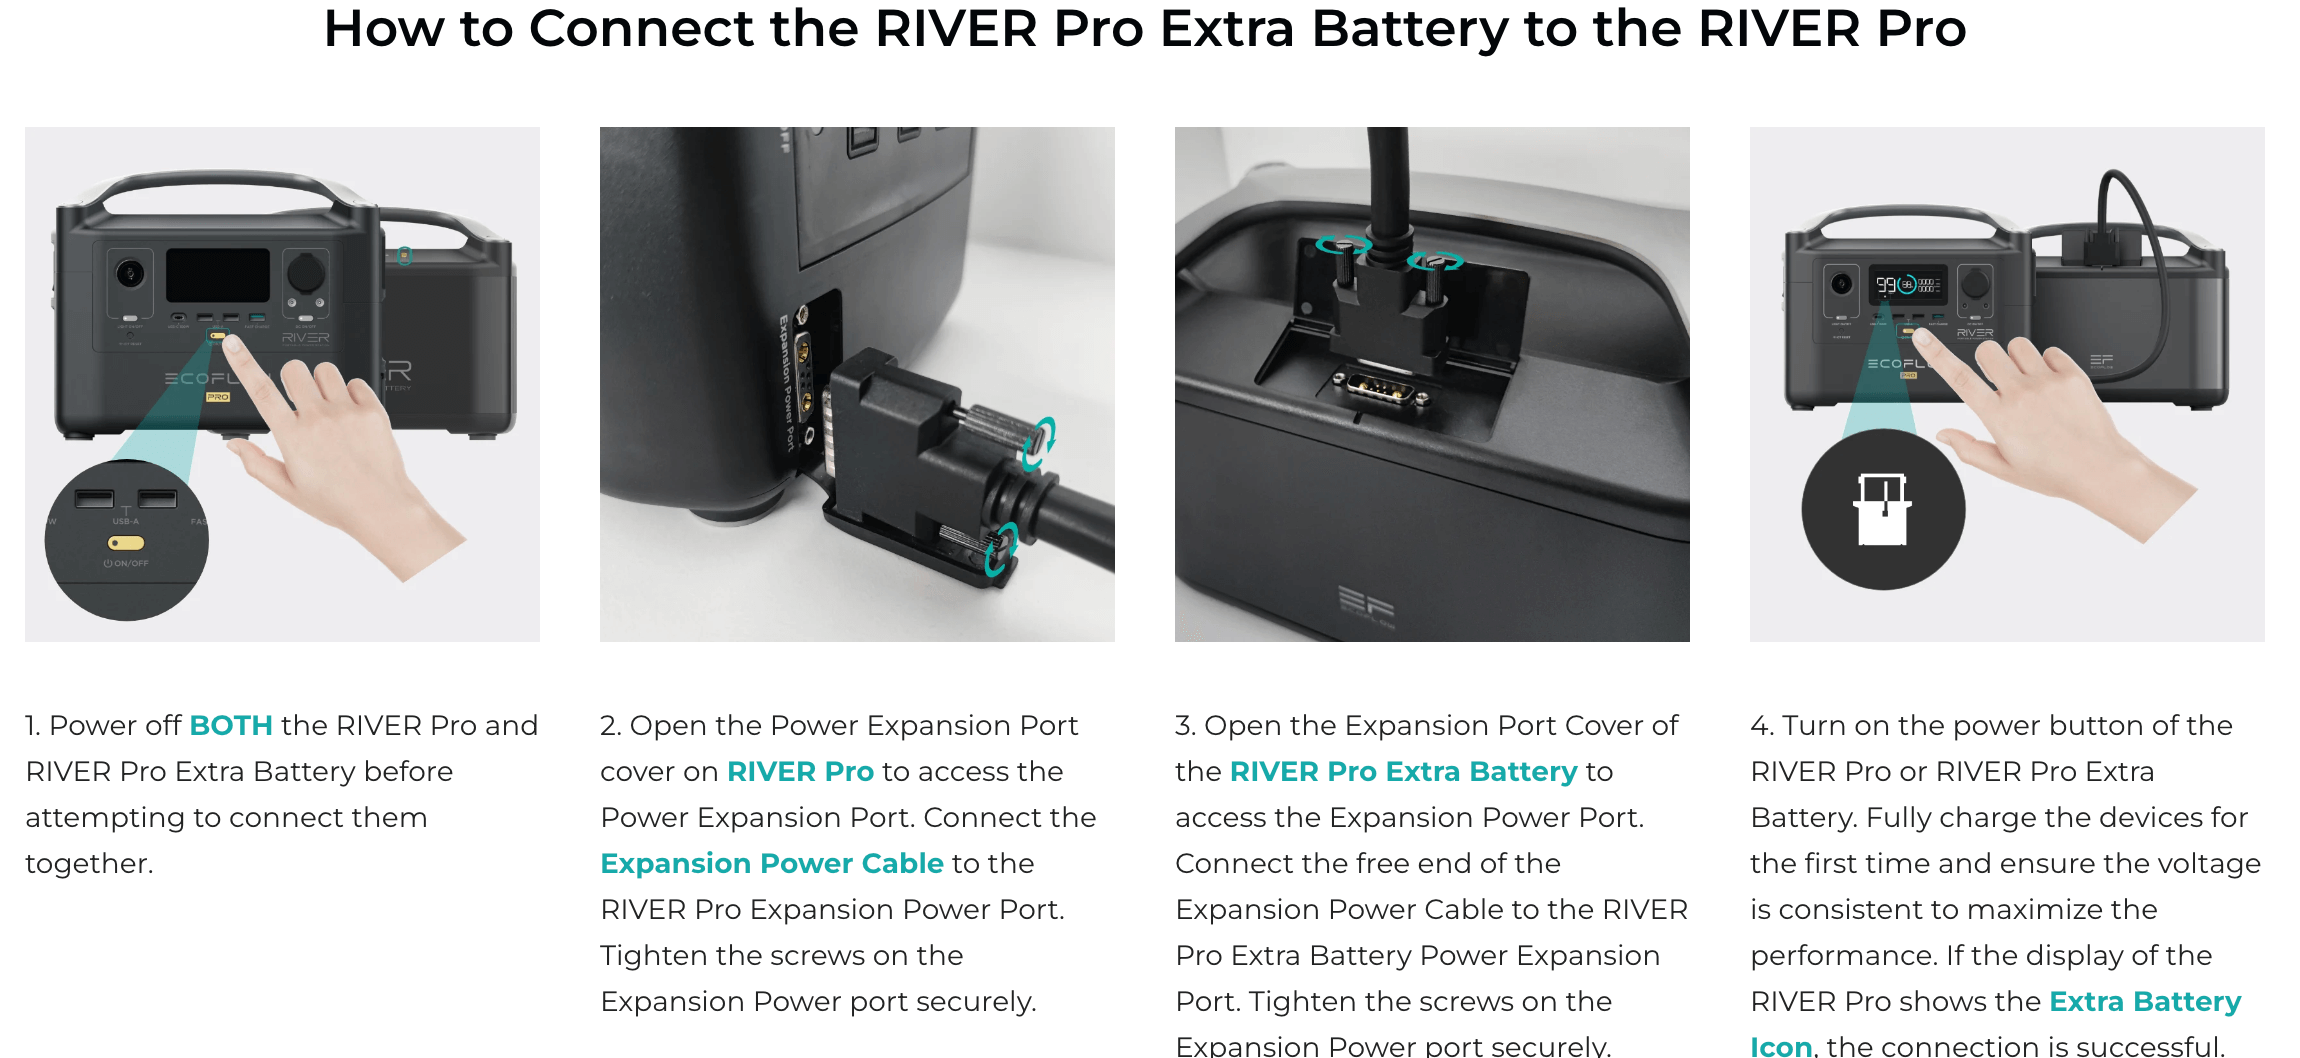 How To Connect EcoFlow River Pro With Extra Battery